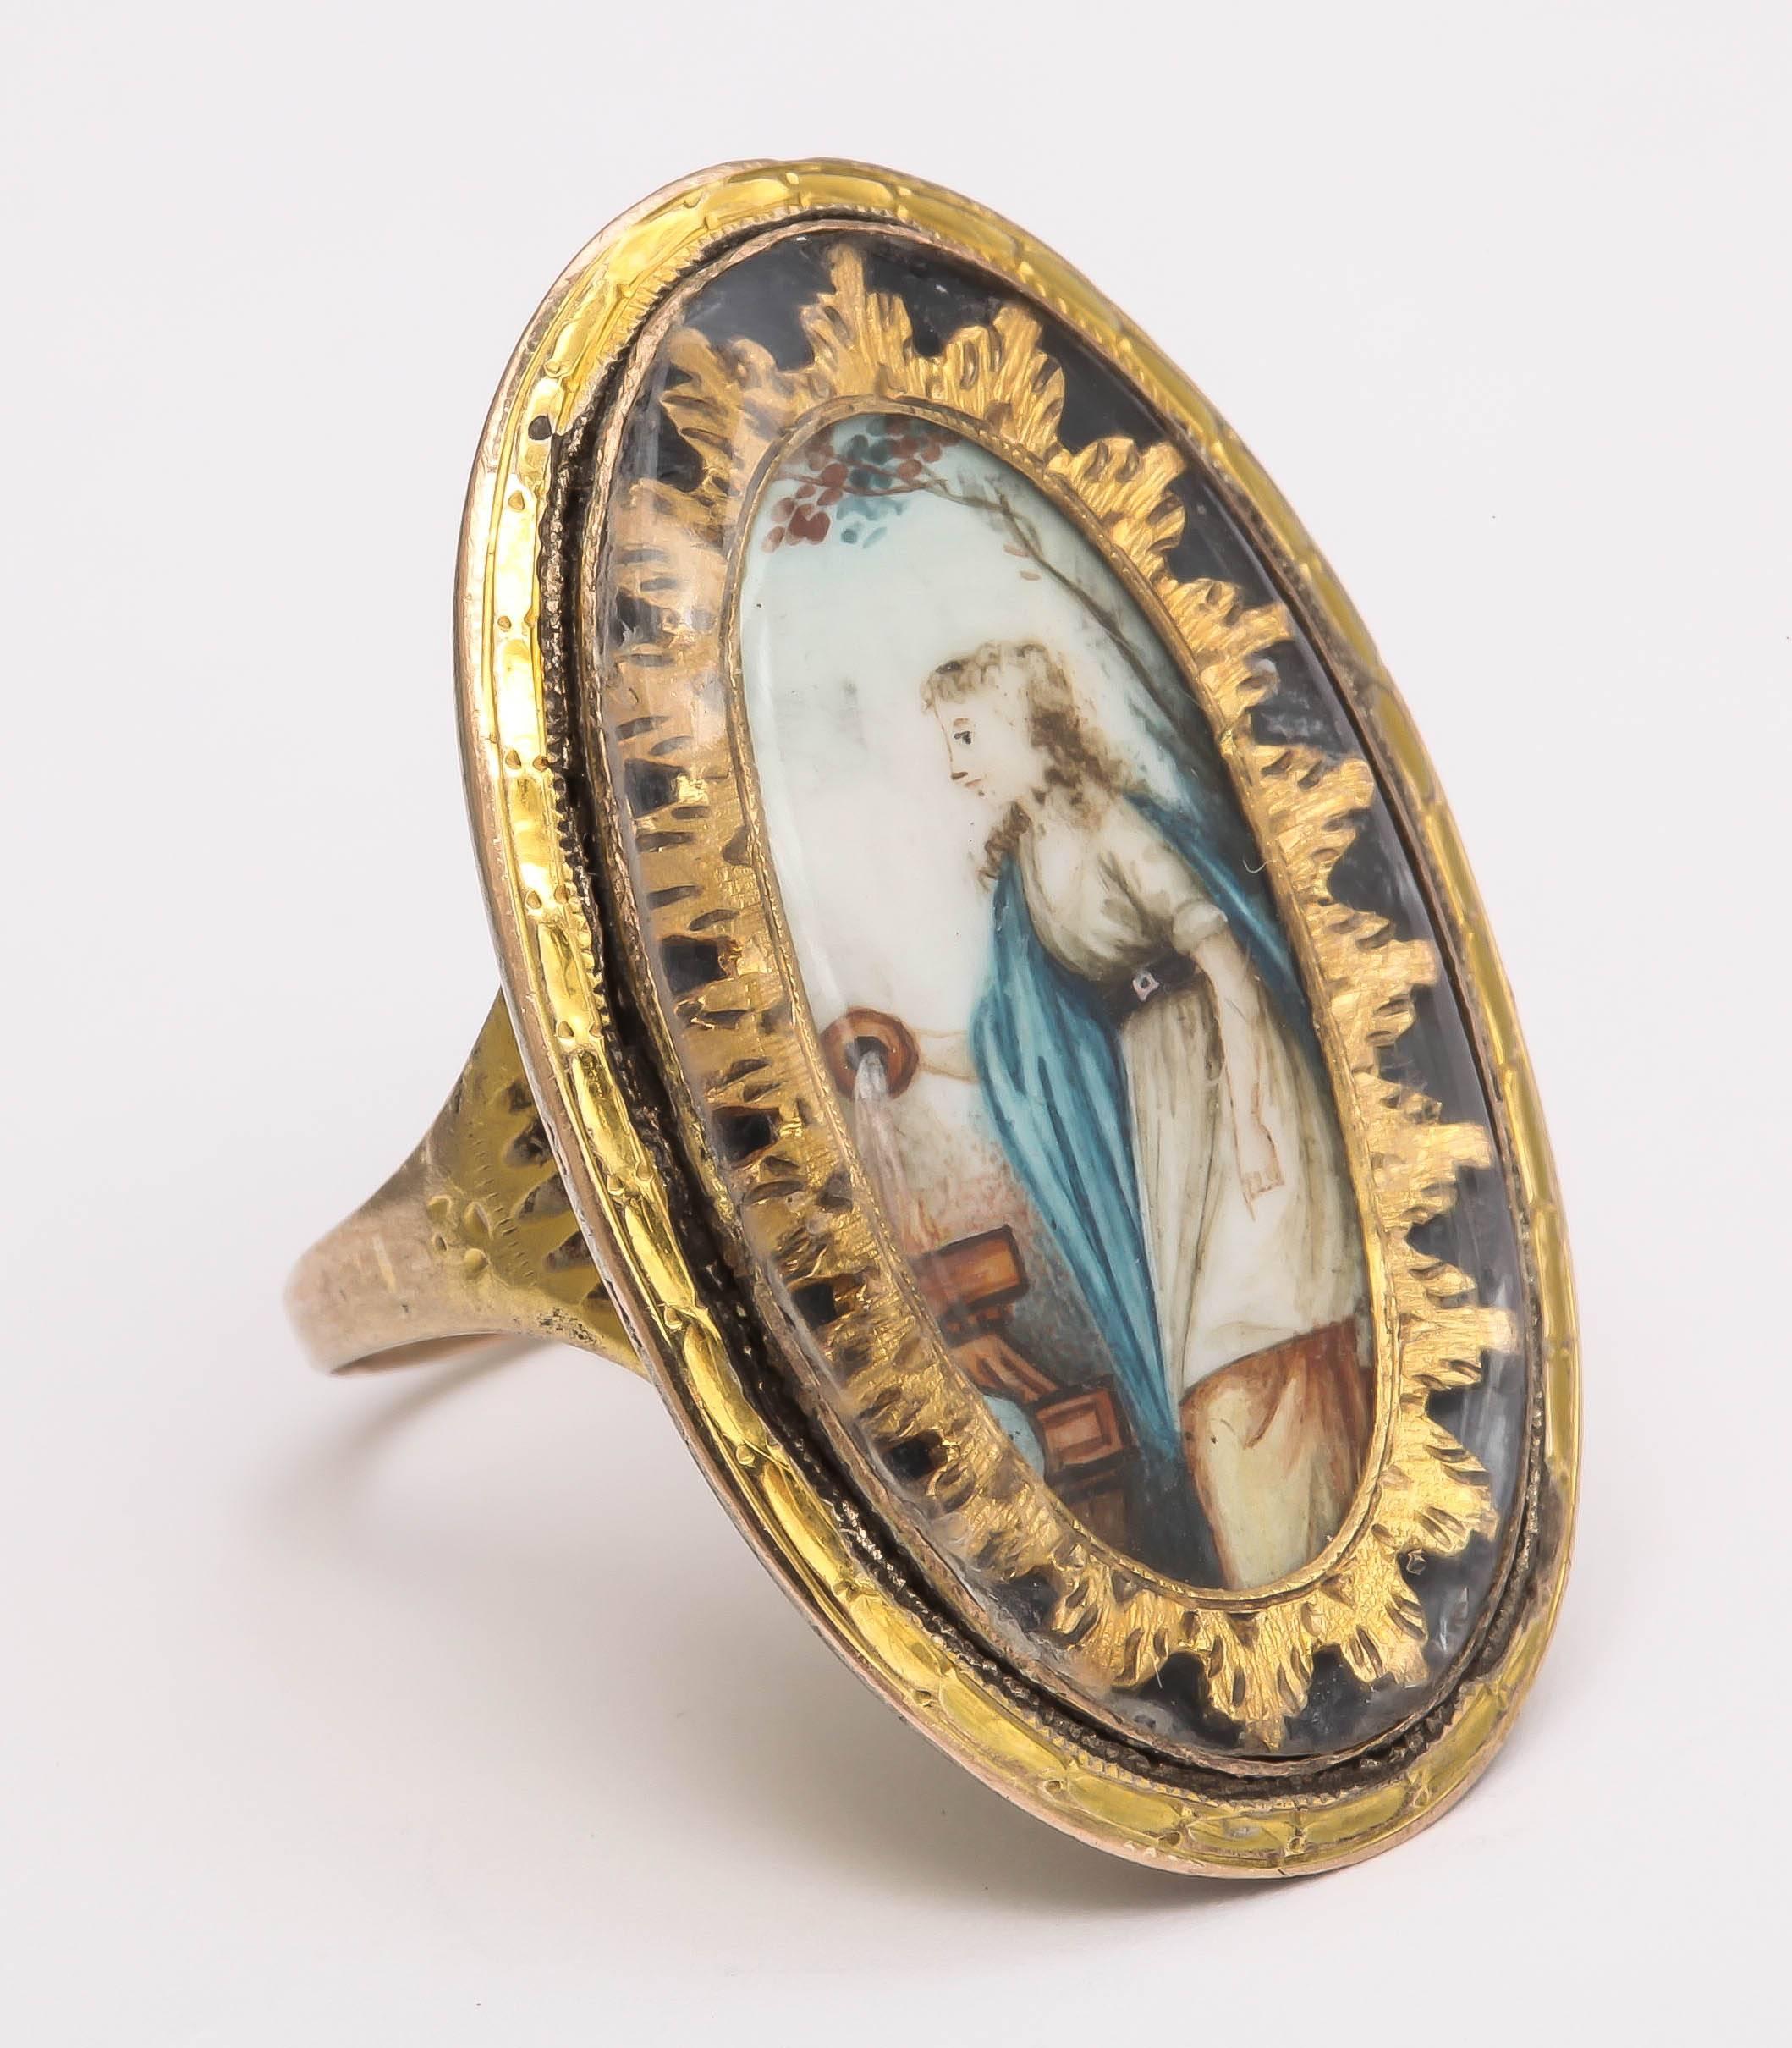 Exquisite mourning ring. Depicts a neoclassical style maiden beneath a tree pouring ashes into an urn. The hand painted miniature is set within a scalloped gold frame under glass. Initials are engraved on the underside of the ring. Shoulders of the